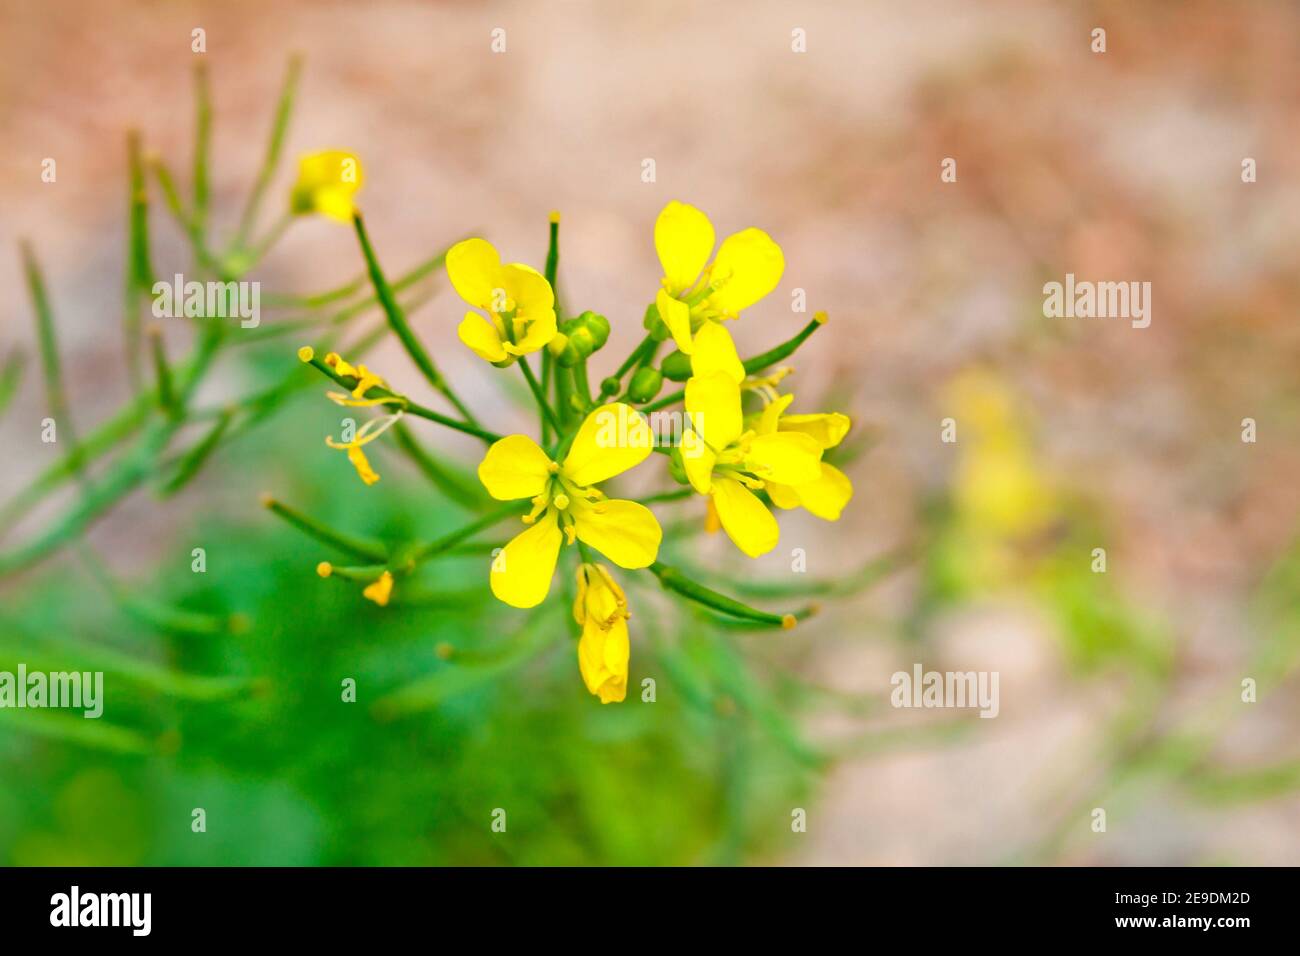 Bloomed mustard flowers closeup views on the fields. Stock Photo